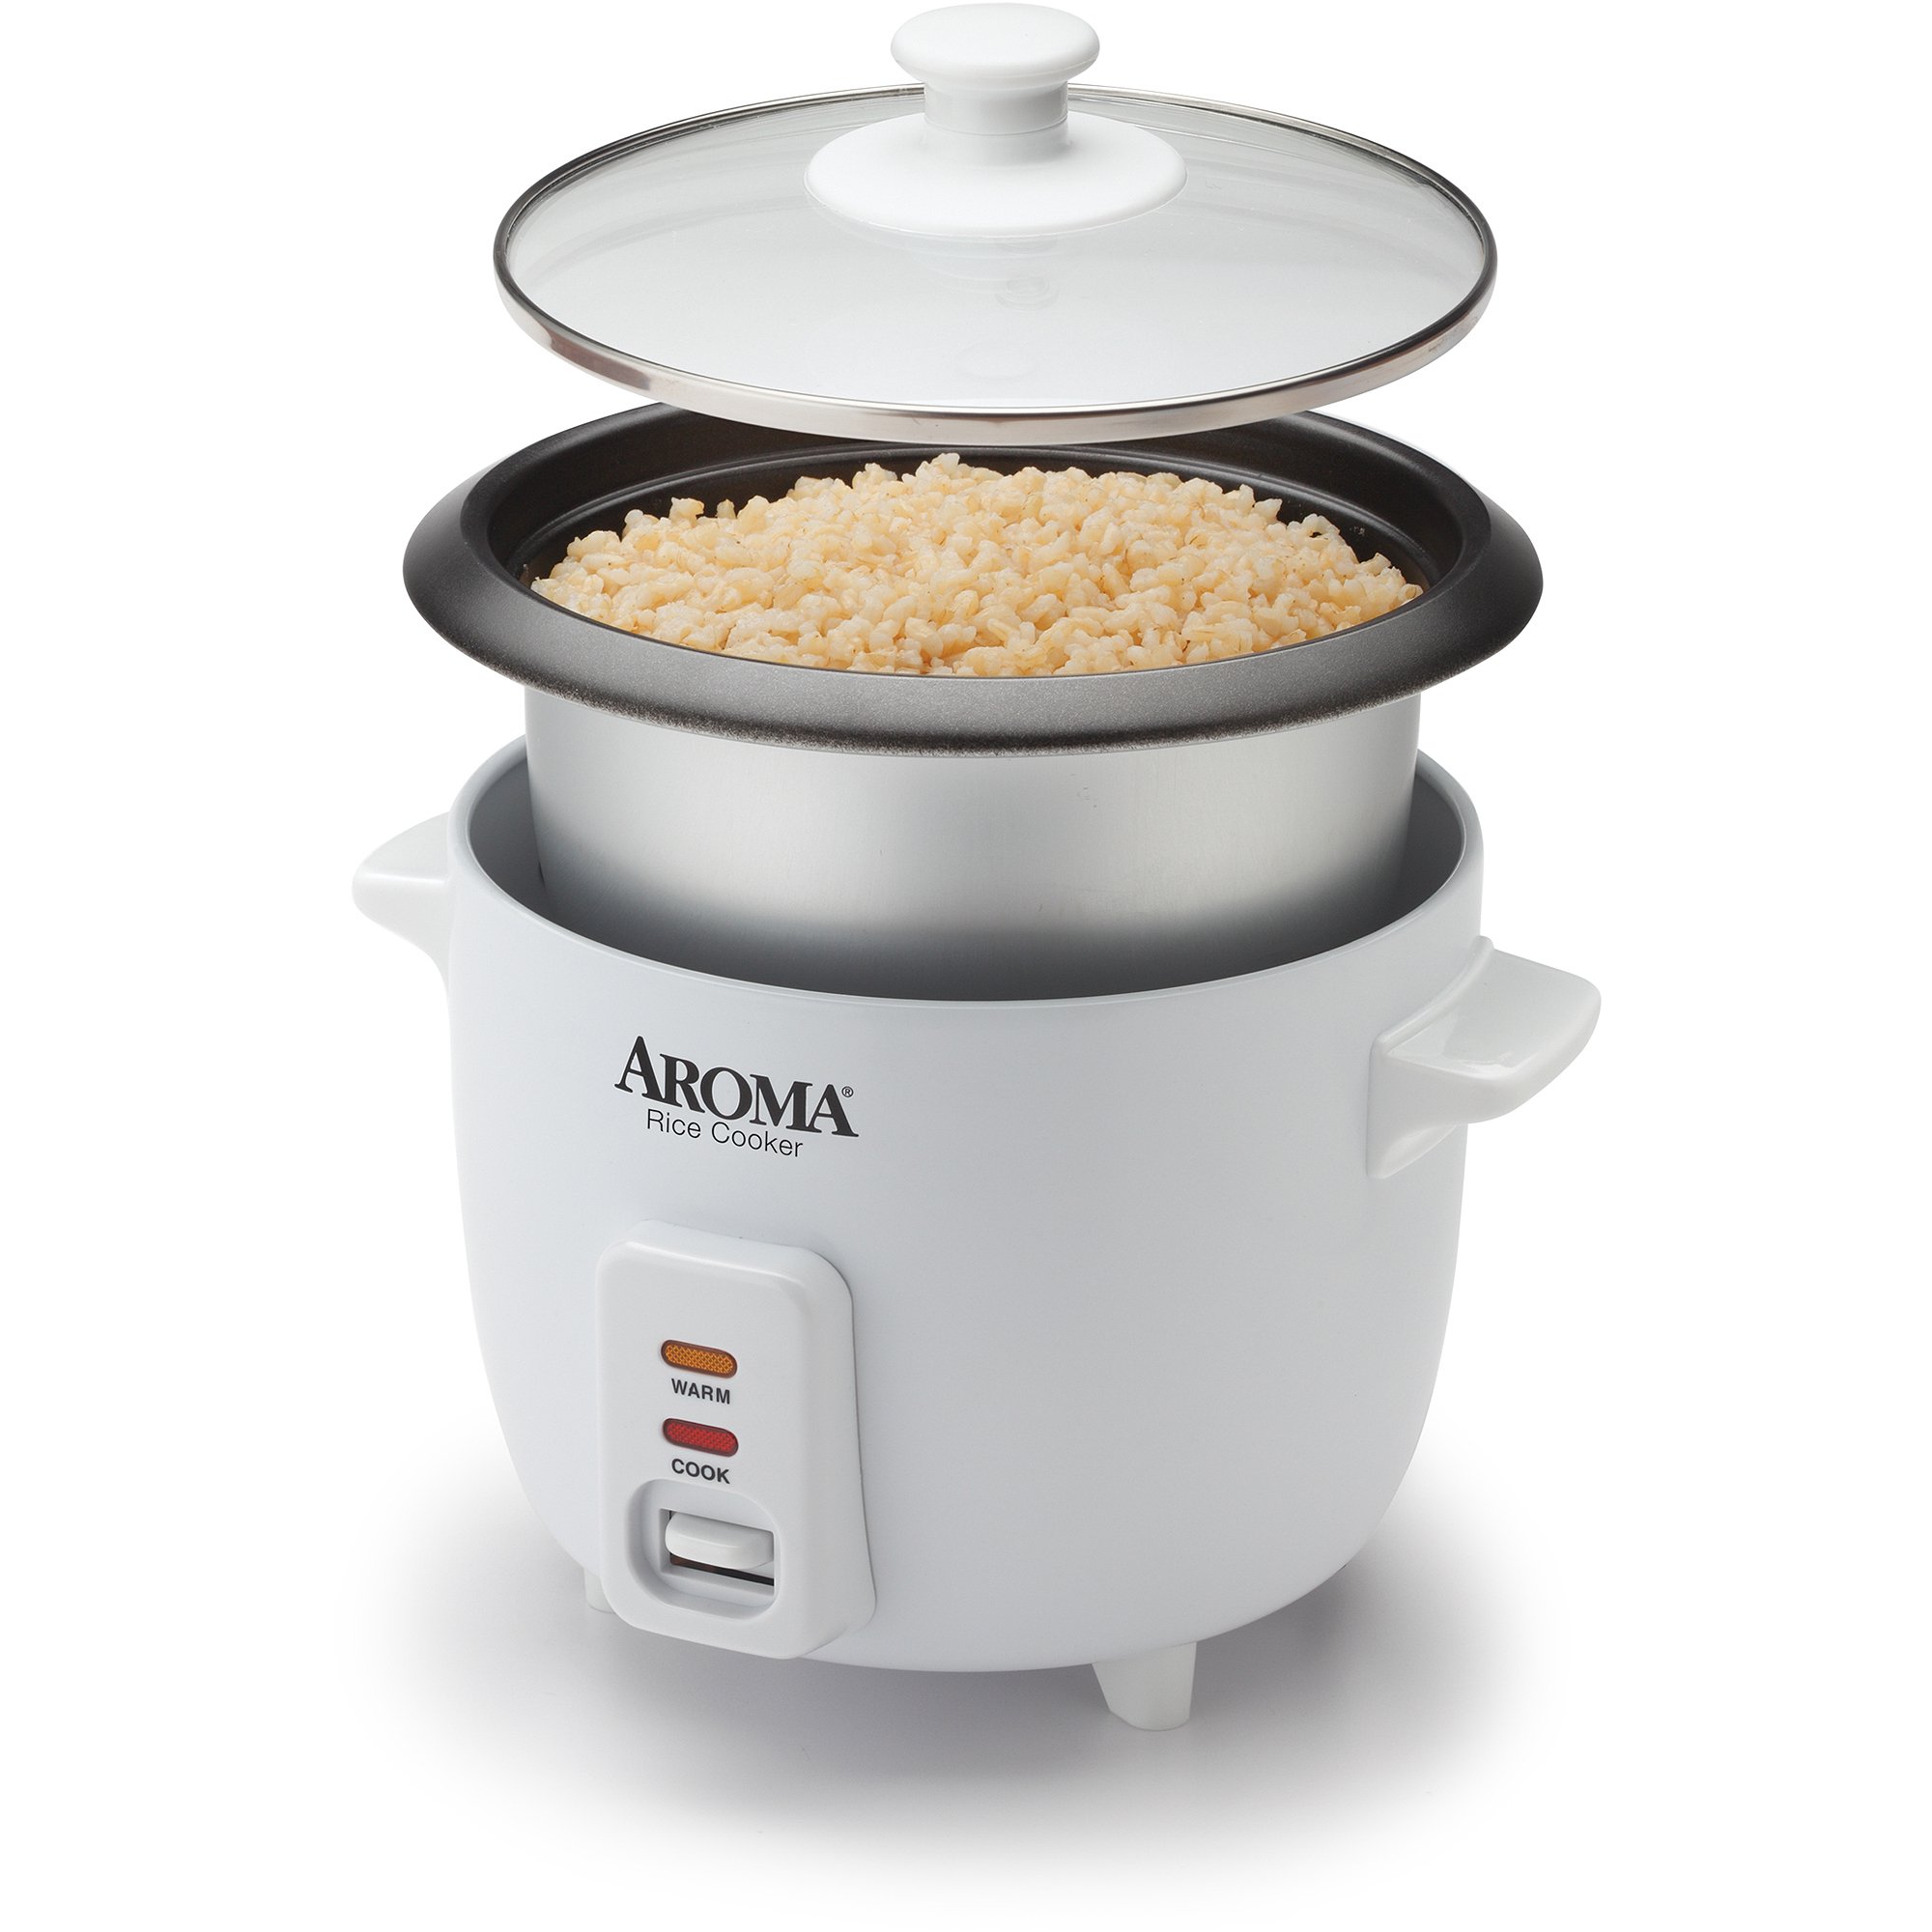 Aroma 6 Cup Non-Stick Pot Style White Rice Cooker, 3 Piece - image 1 of 5